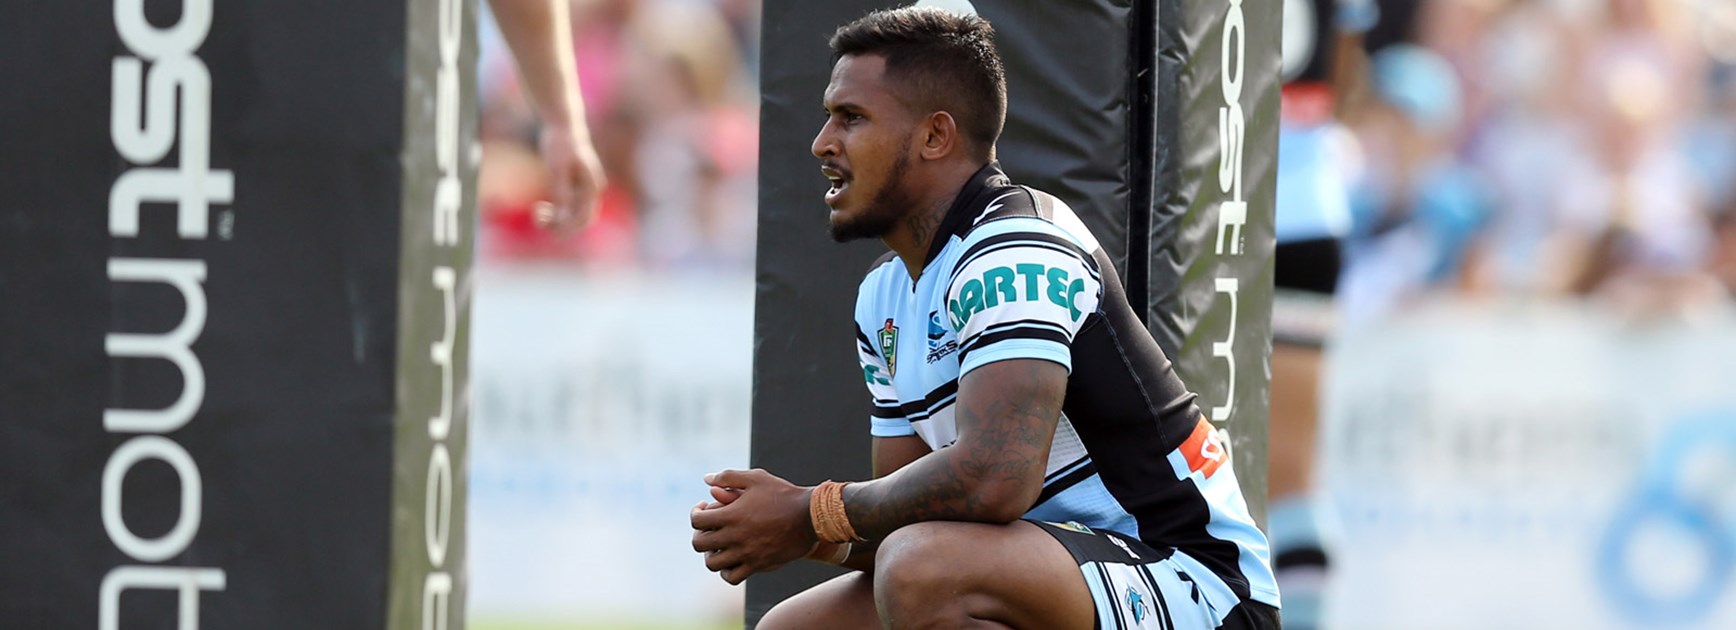 Sharks fullback Ben Barba believed 2016 was his last chance to prove himself in the NRL.